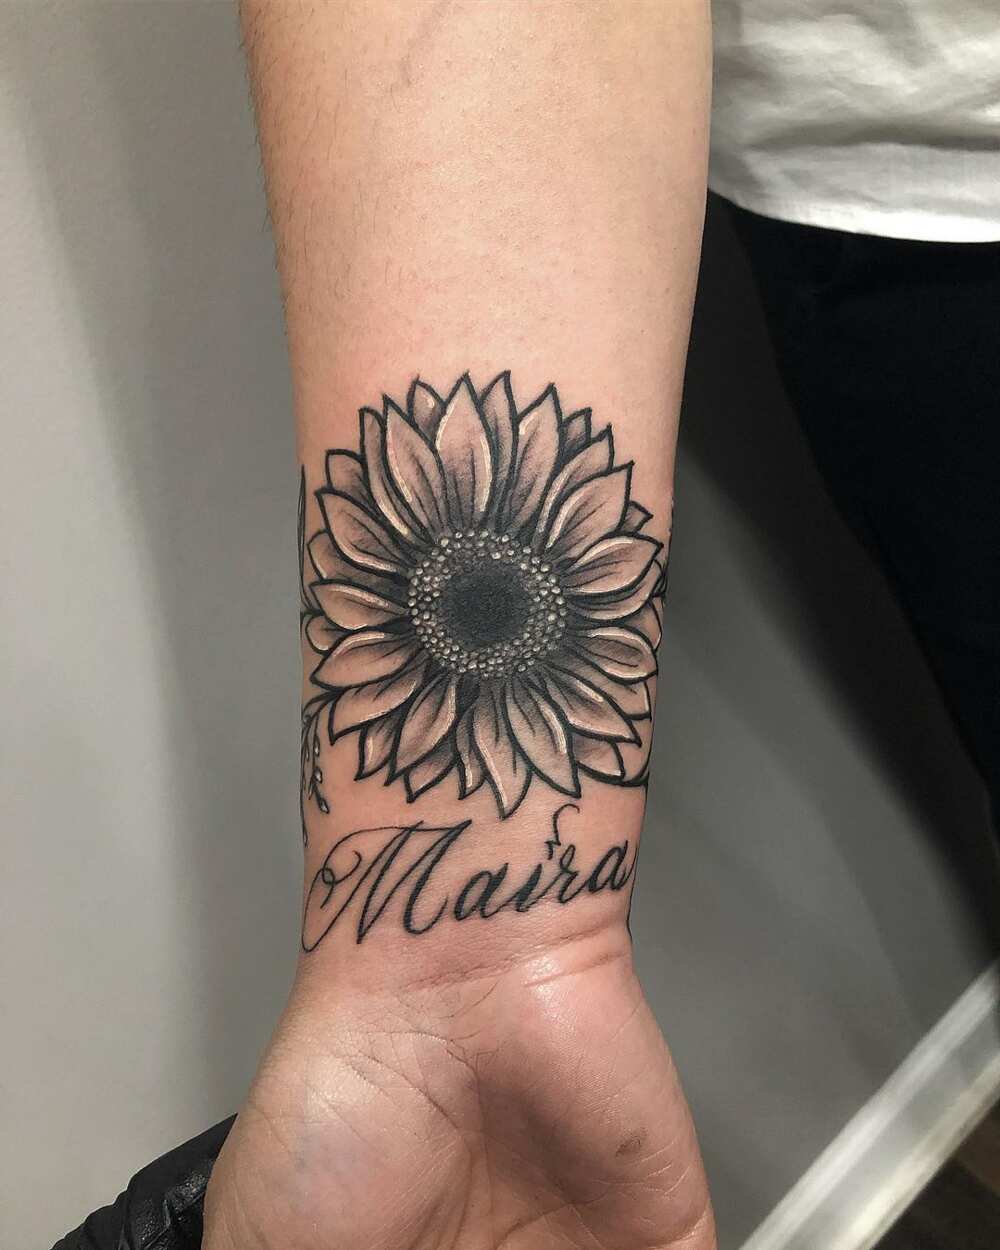 Sunflower meaning